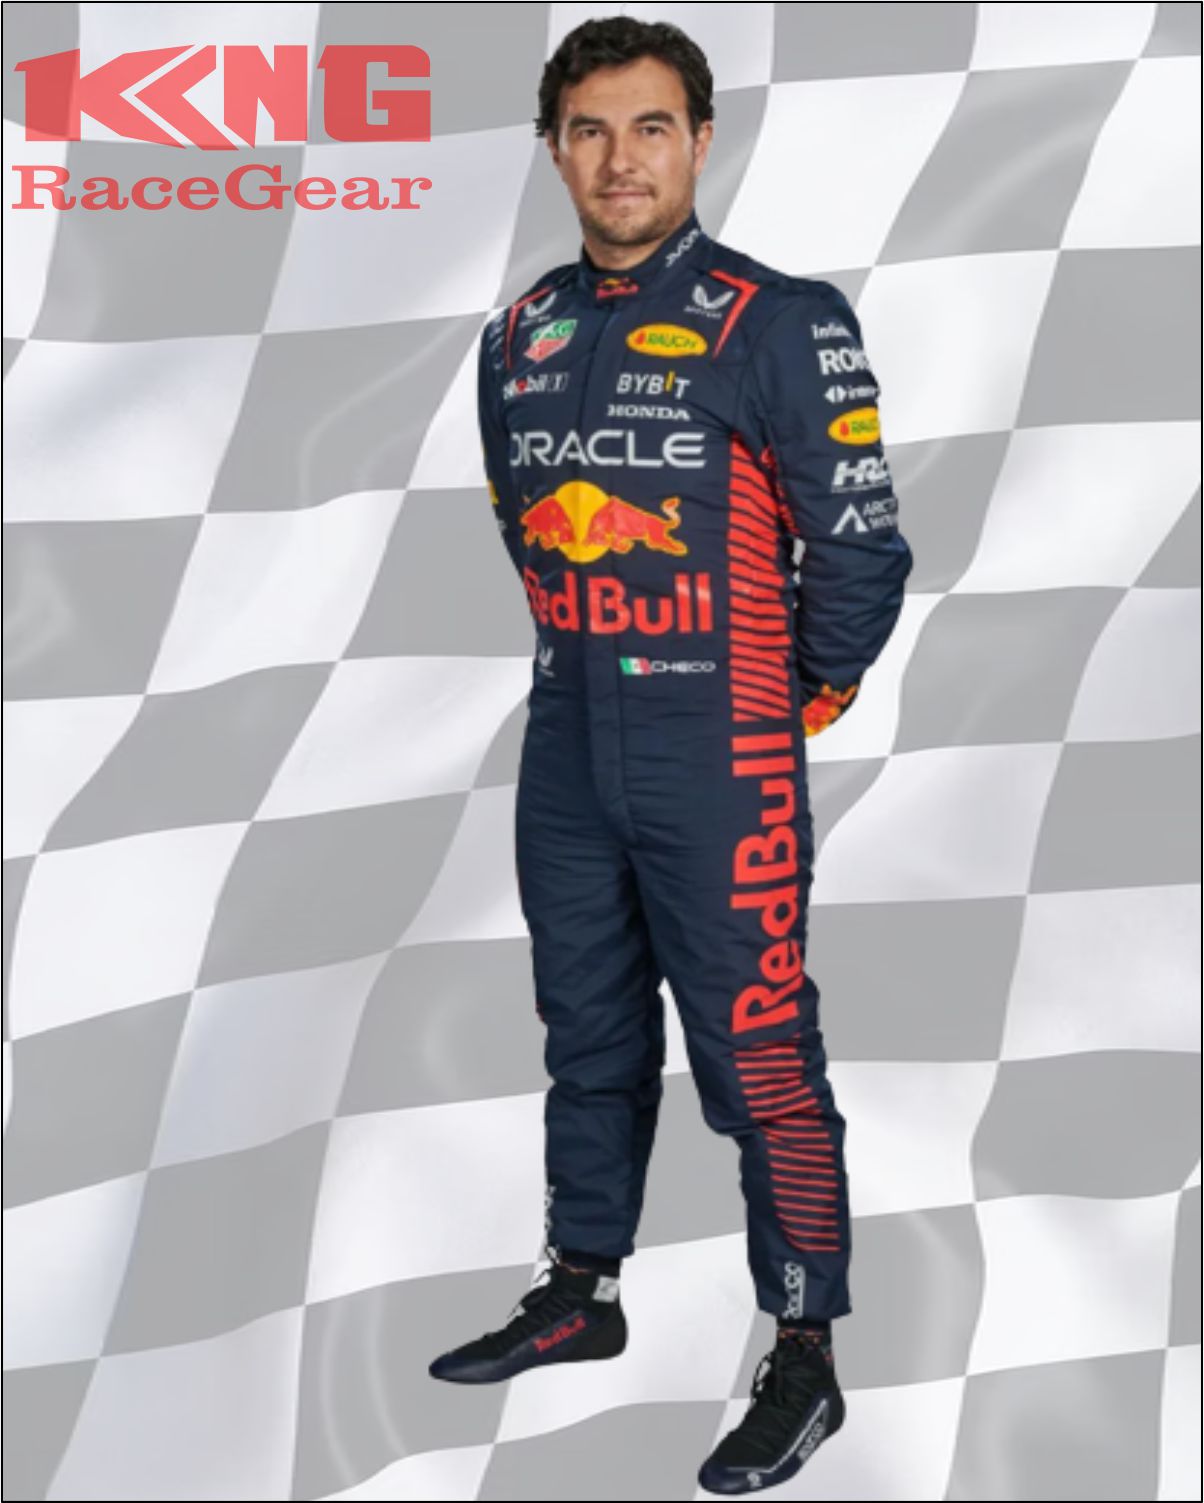 2023 Sergio Perez Red Bull Honda Oracle Racing F1 Suit / King RaceGear 44 / Nave Blue / 100 % Polyester